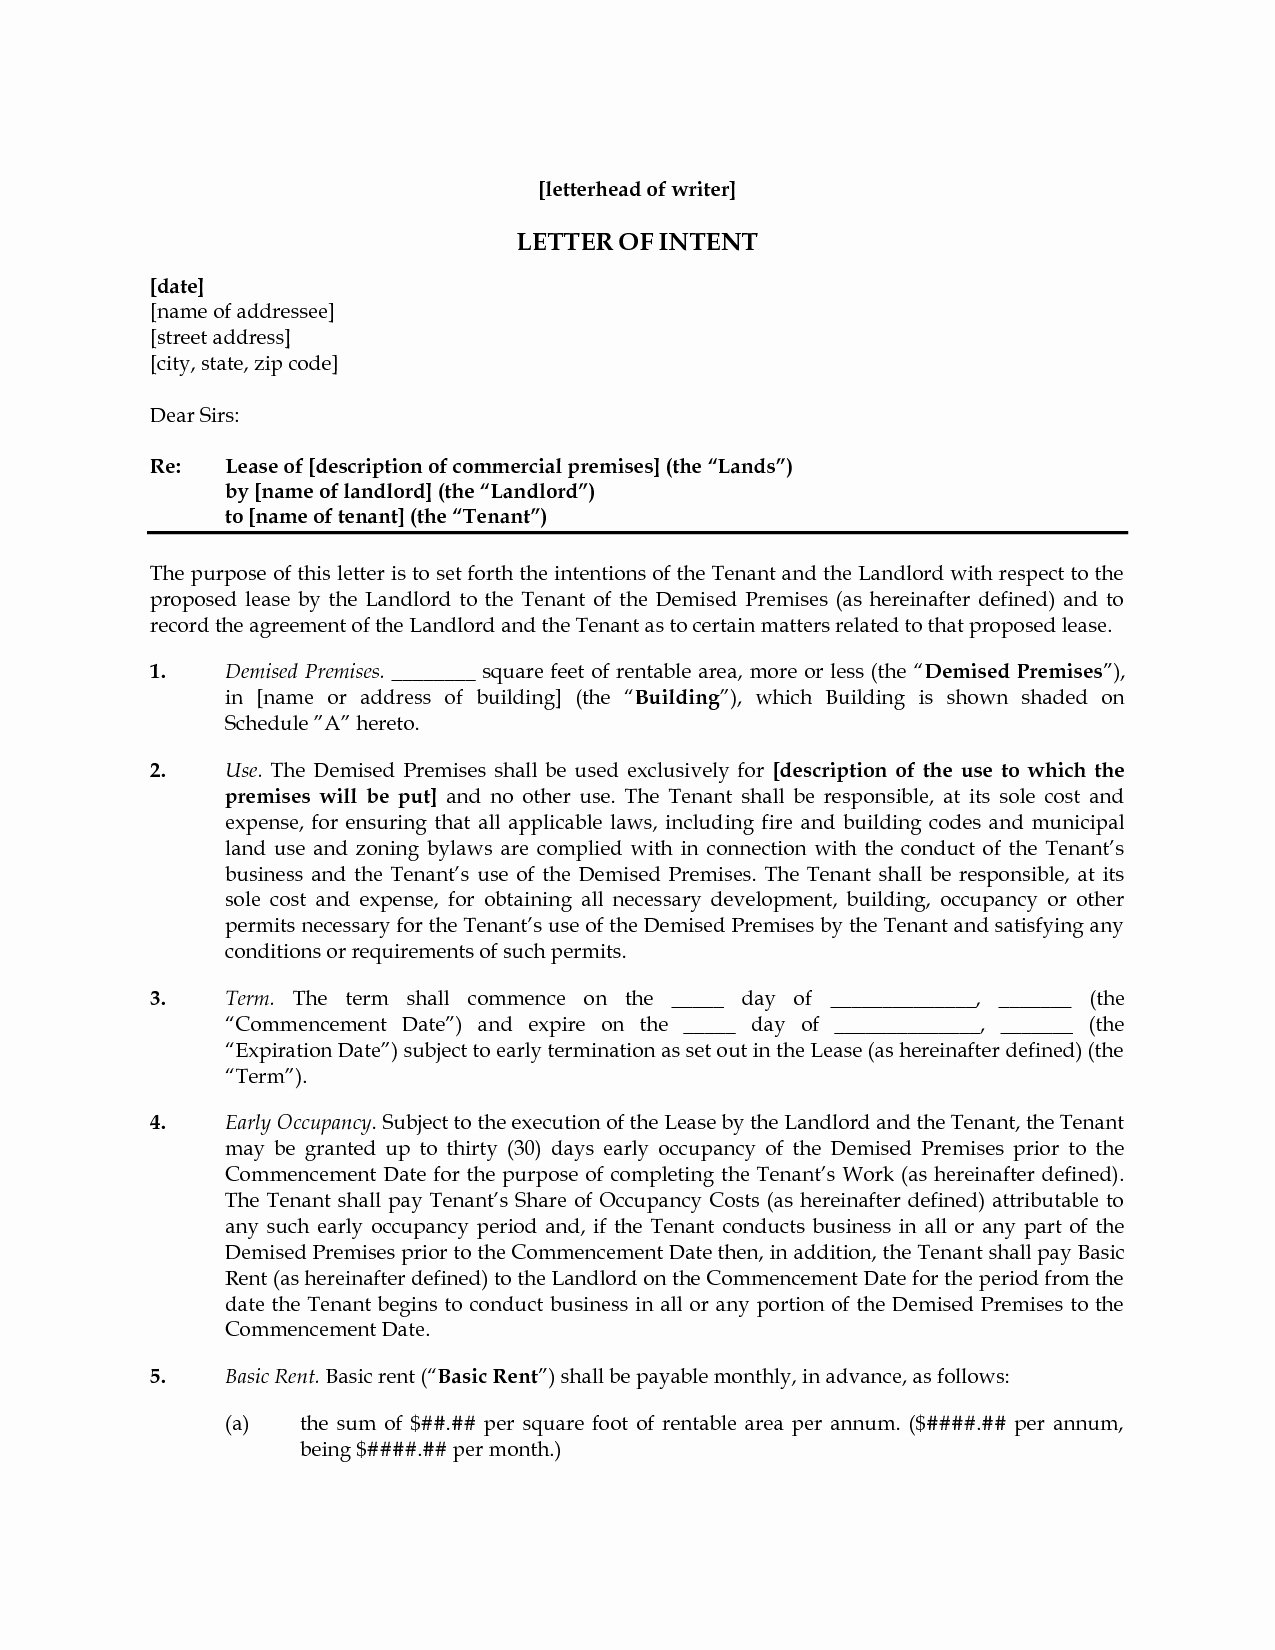 Free Sample Letter Of Intent to Lease A Commercial Space Elegant Letter Intent to Lease Mercial Space Template